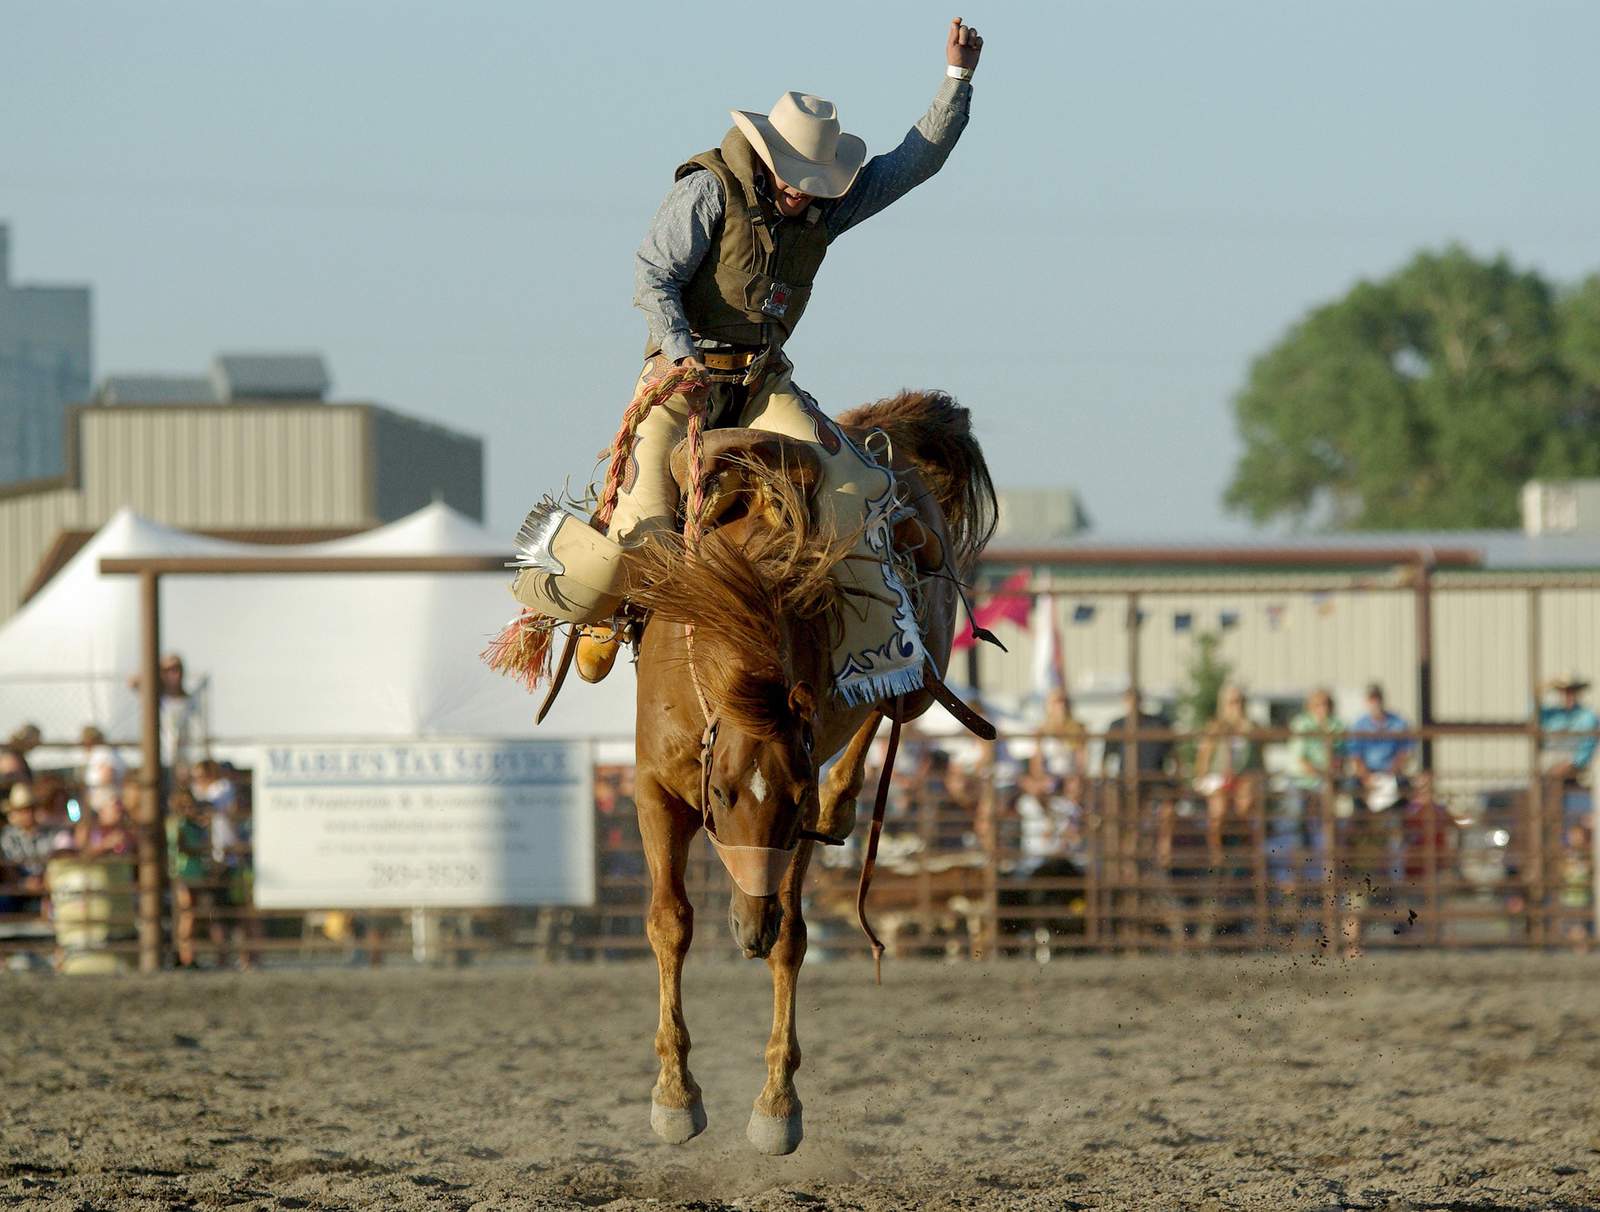 Cowboys at Worlds Largest Amateur Rodeo still set to ride despite COVID-19